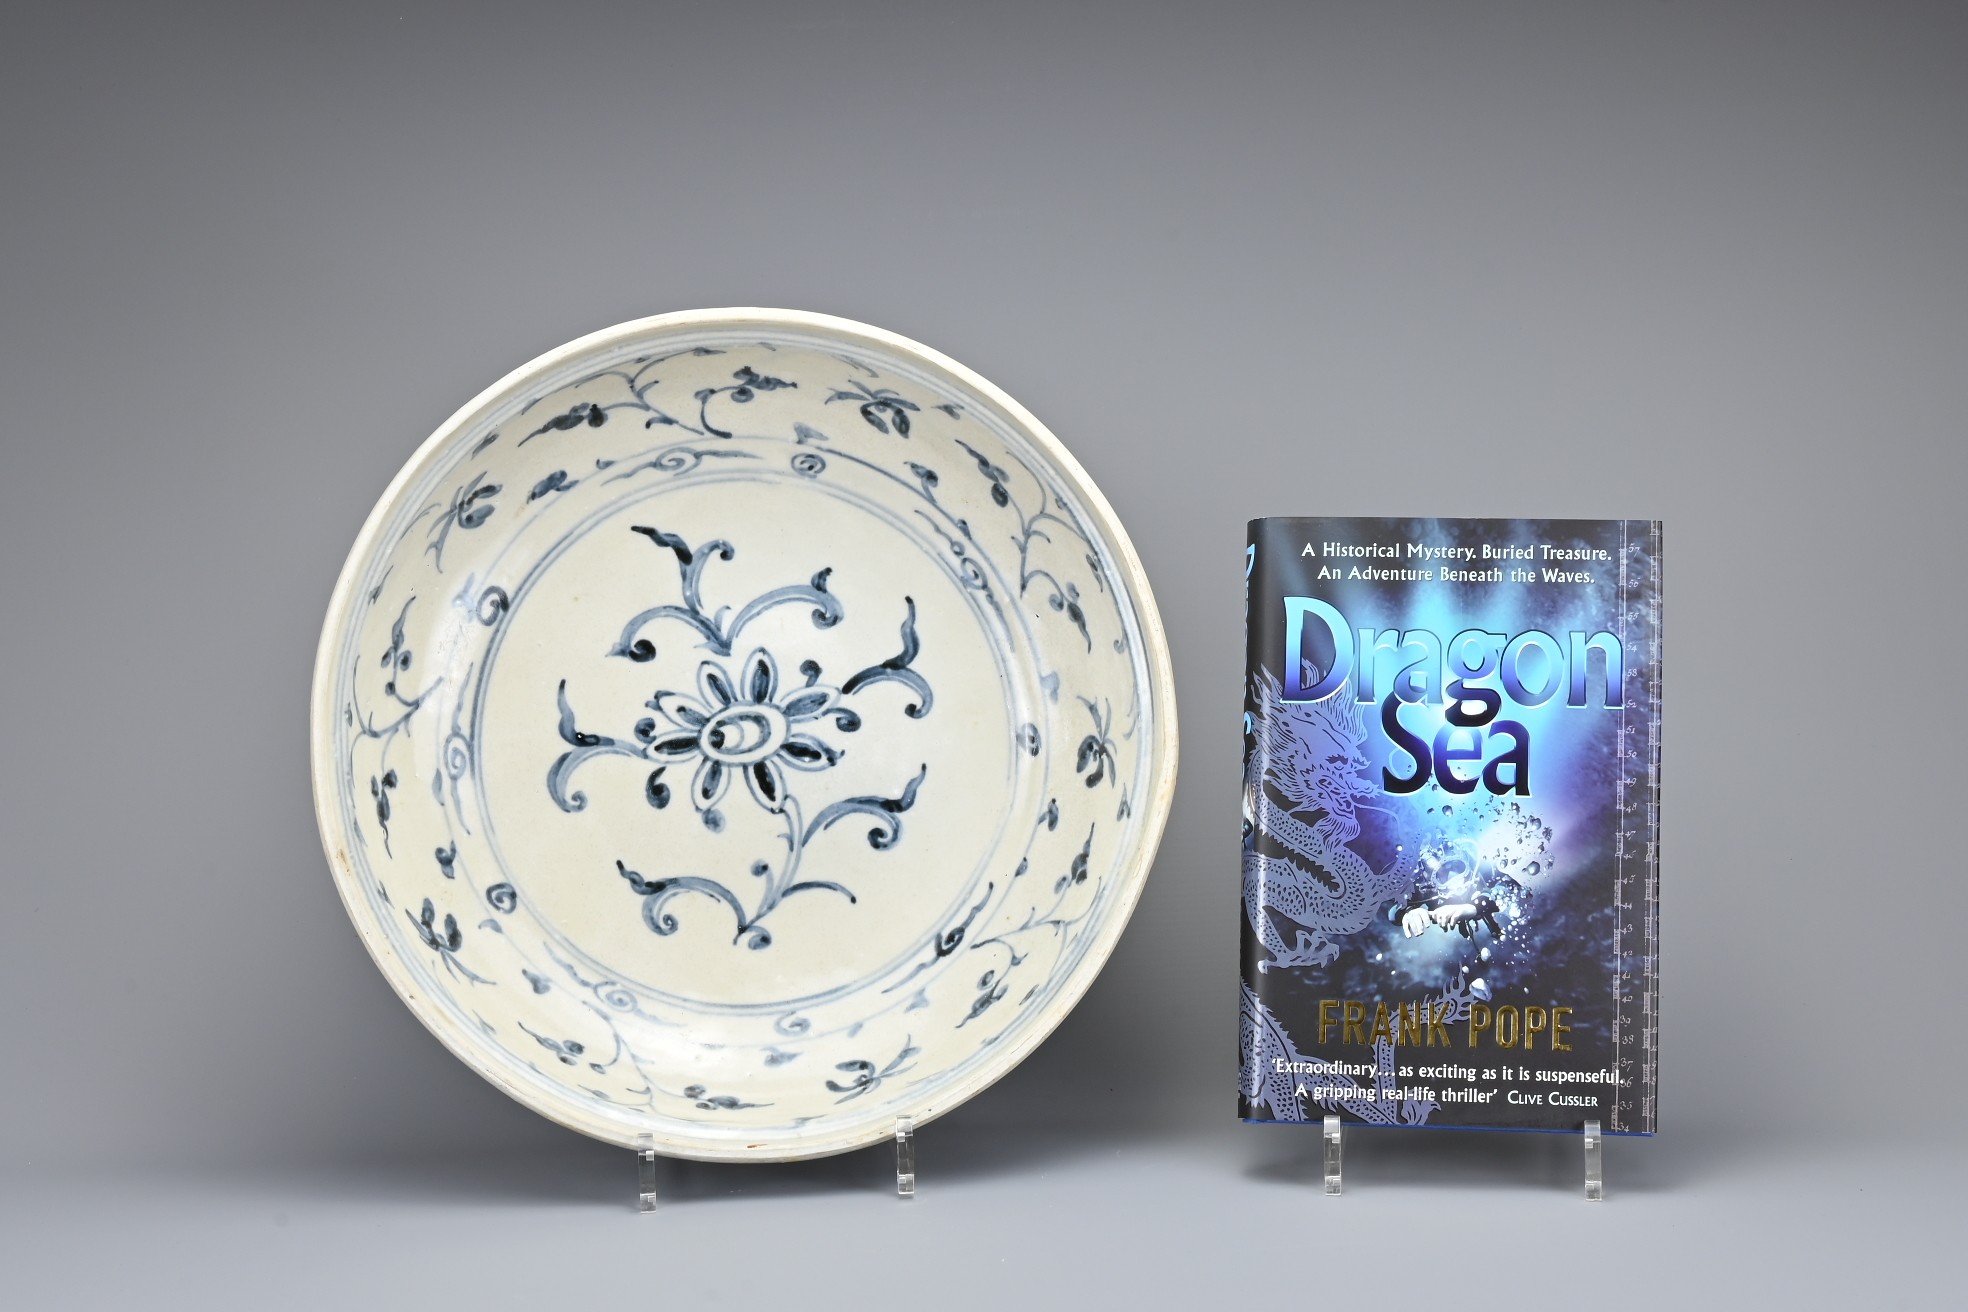 A LARGE VIETNAMESE BLUE & WHITE PORCELAIN DISH, 15TH CENTURY WITH BOOK. Heavily-potted, decorated in